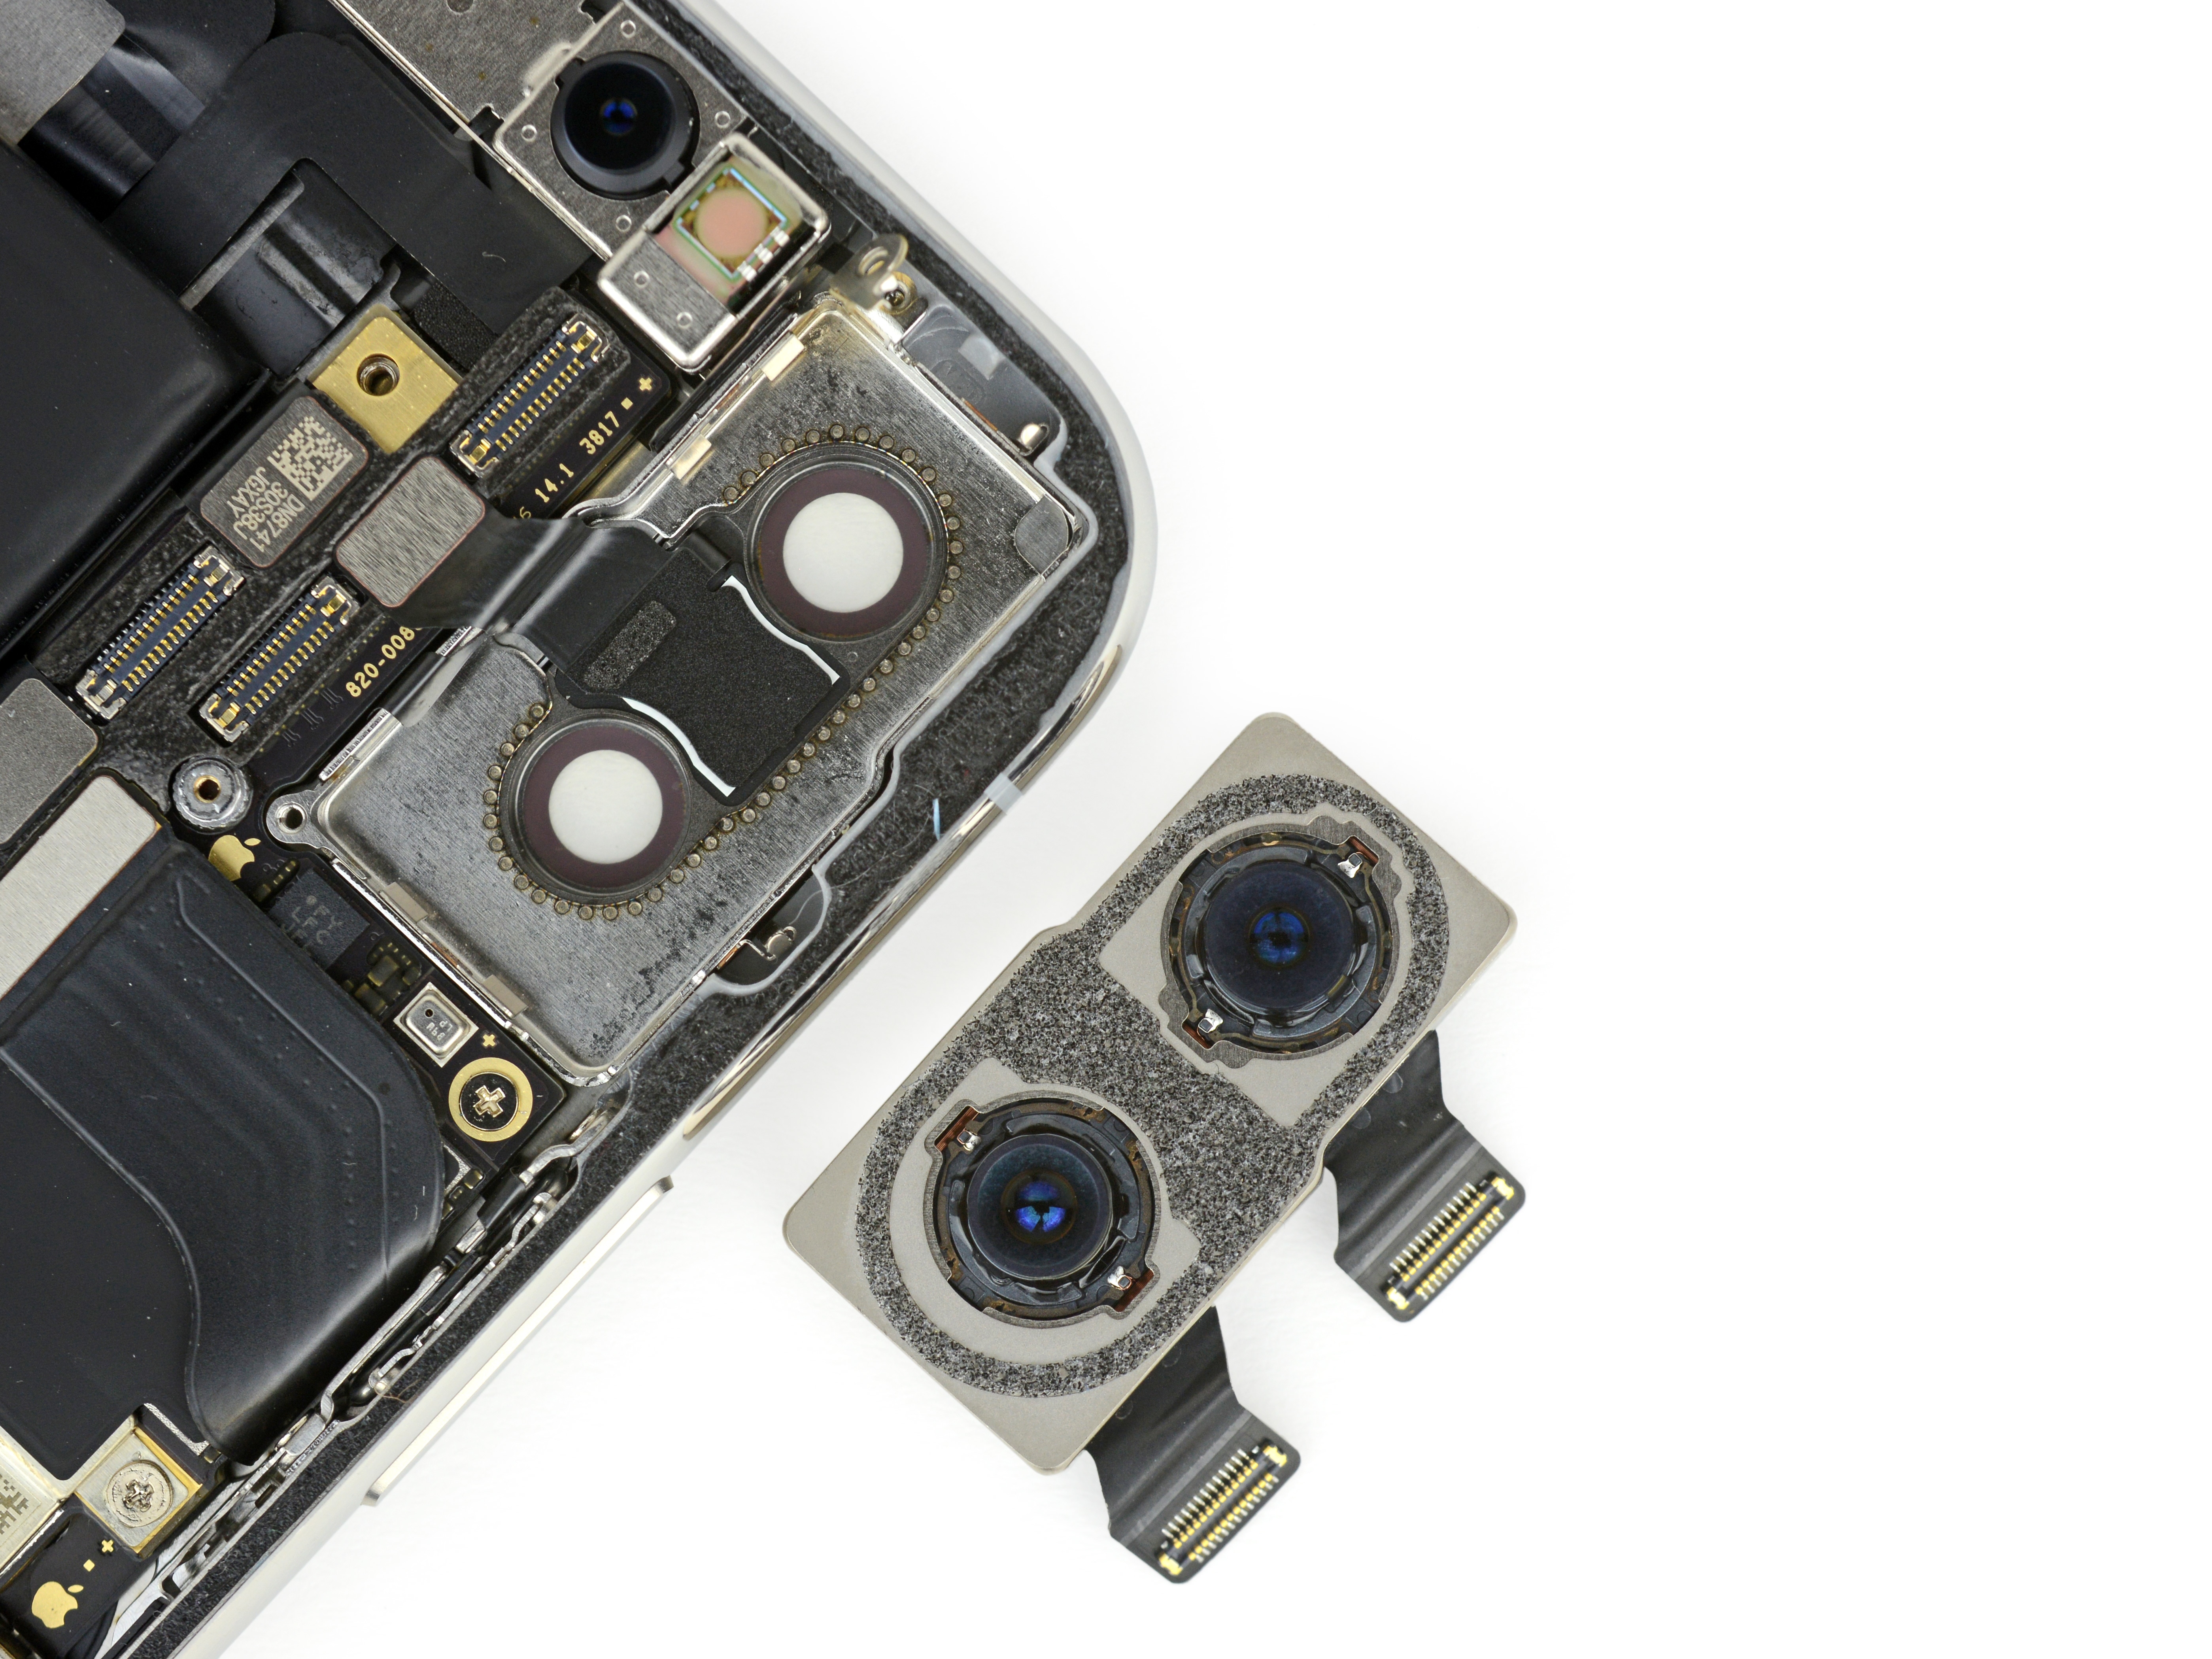 iPhone X disassembled by iFixit